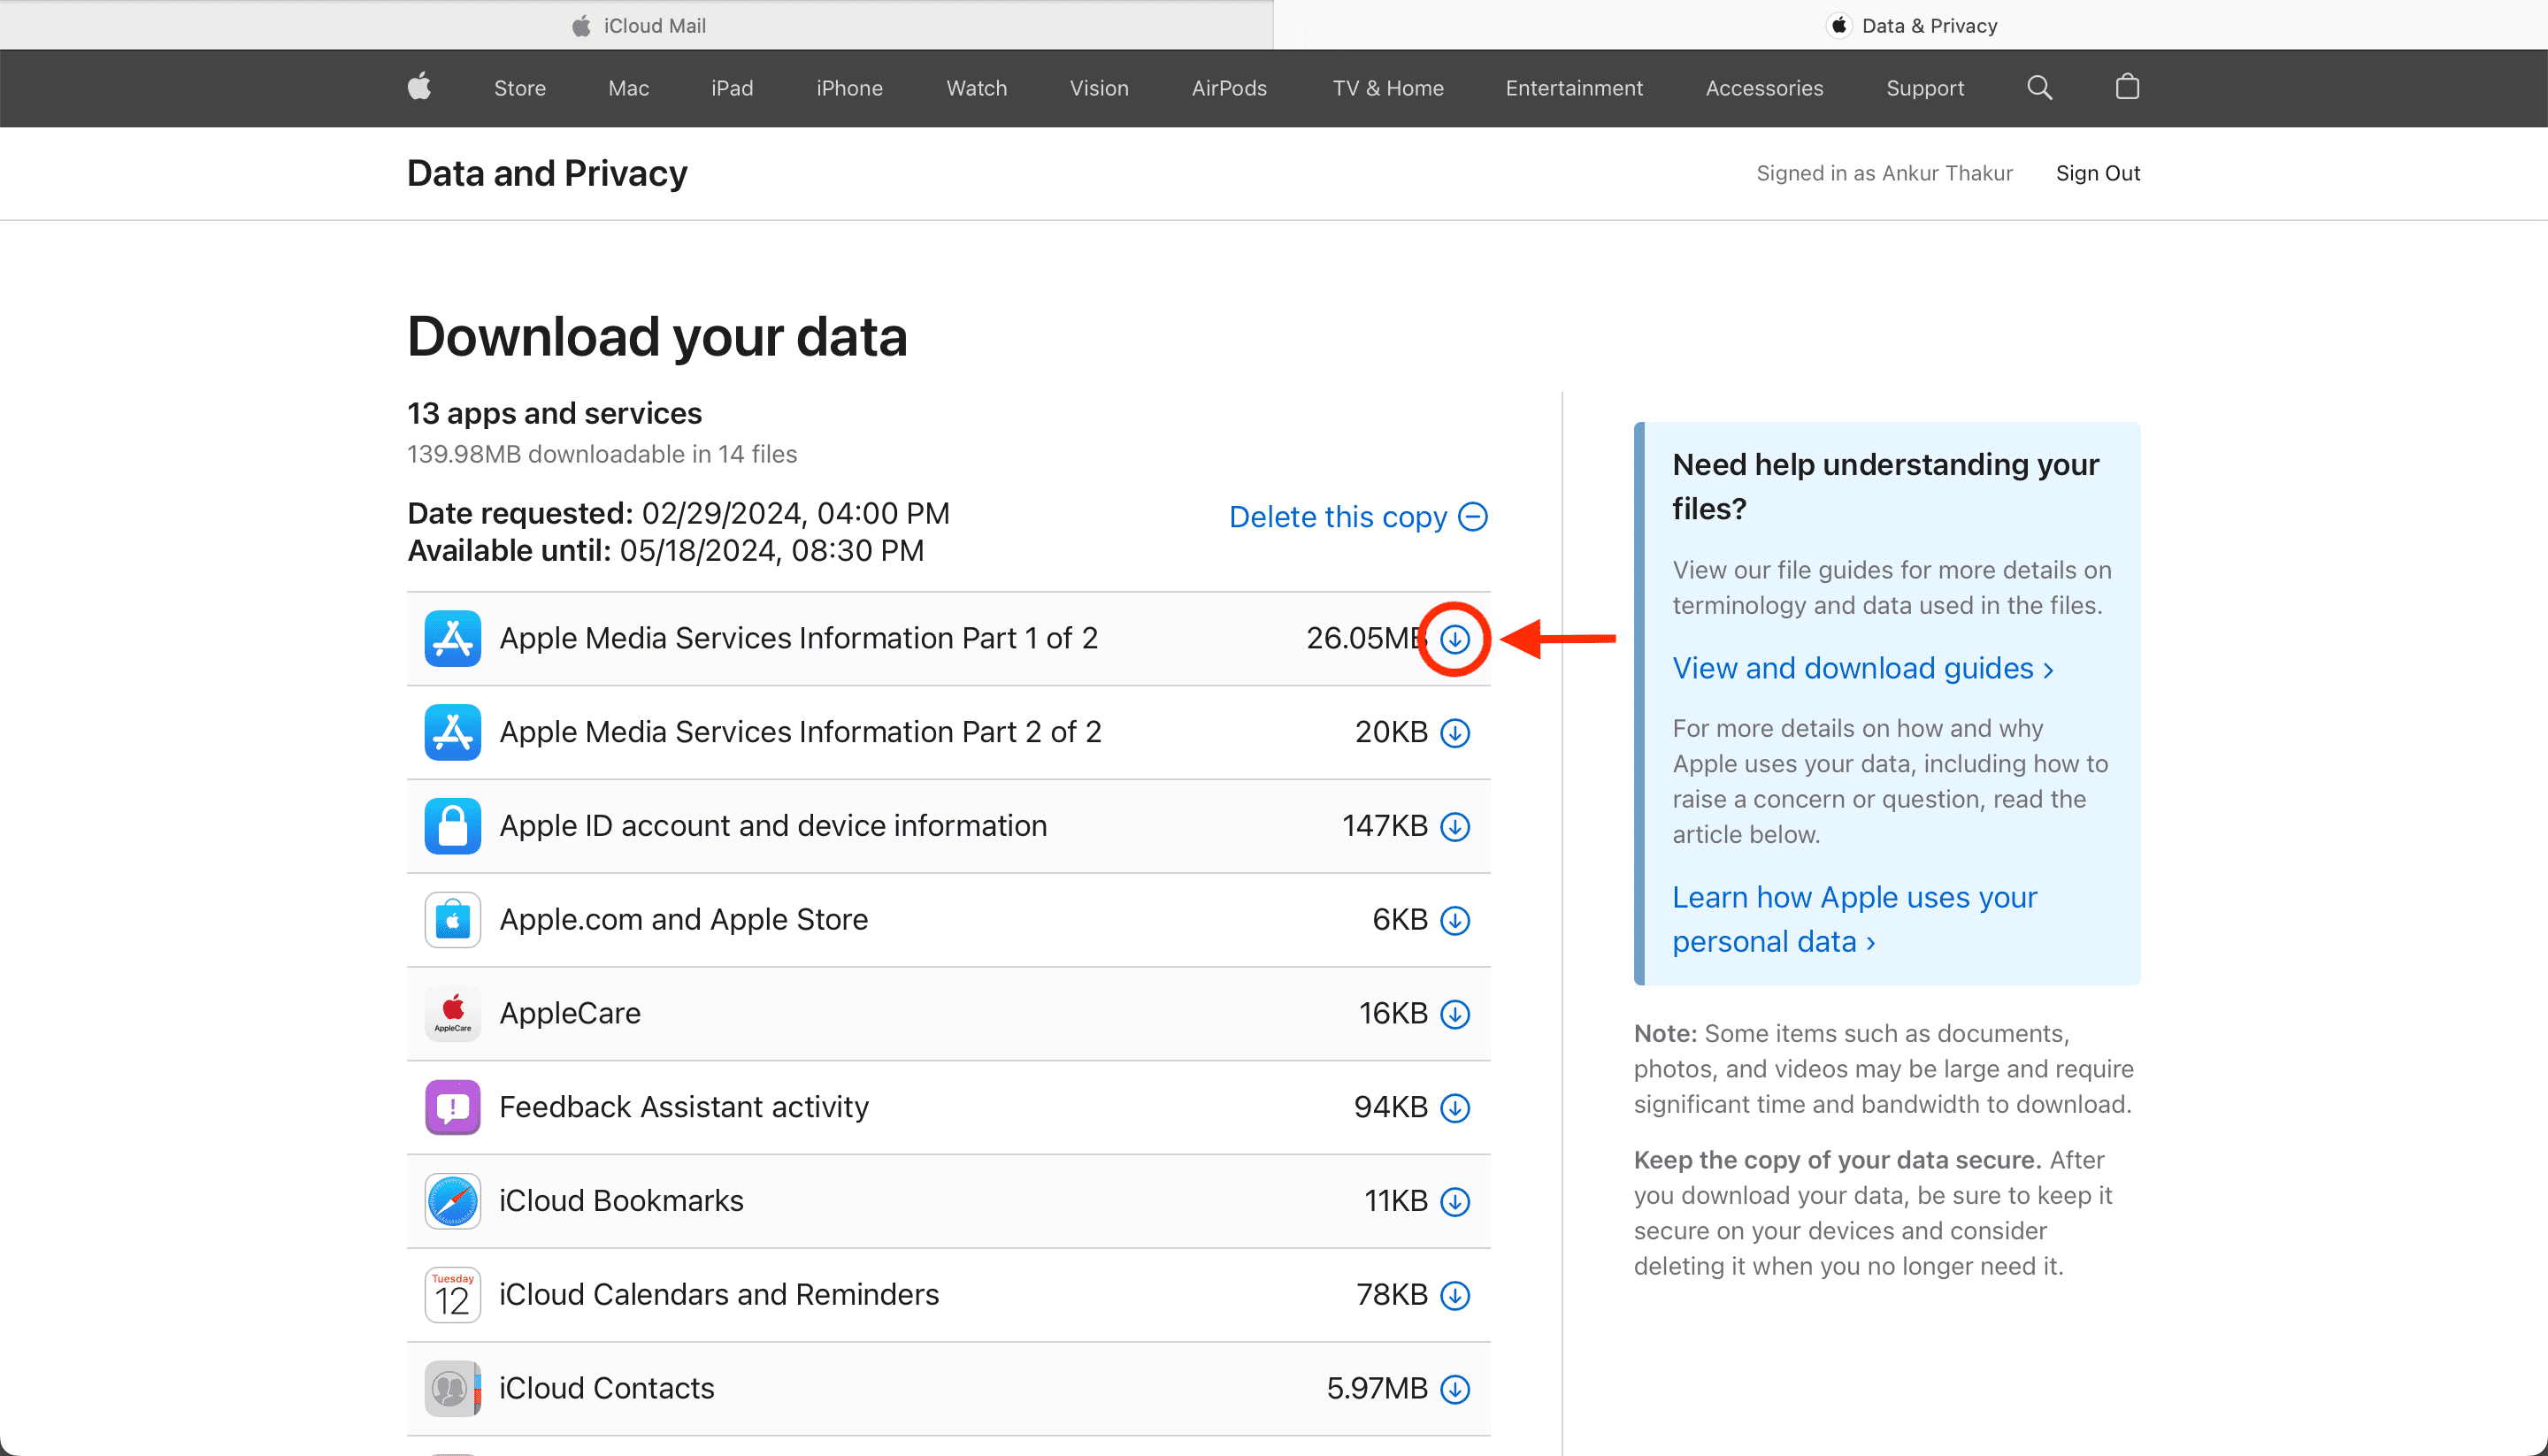 Download your data from Apple